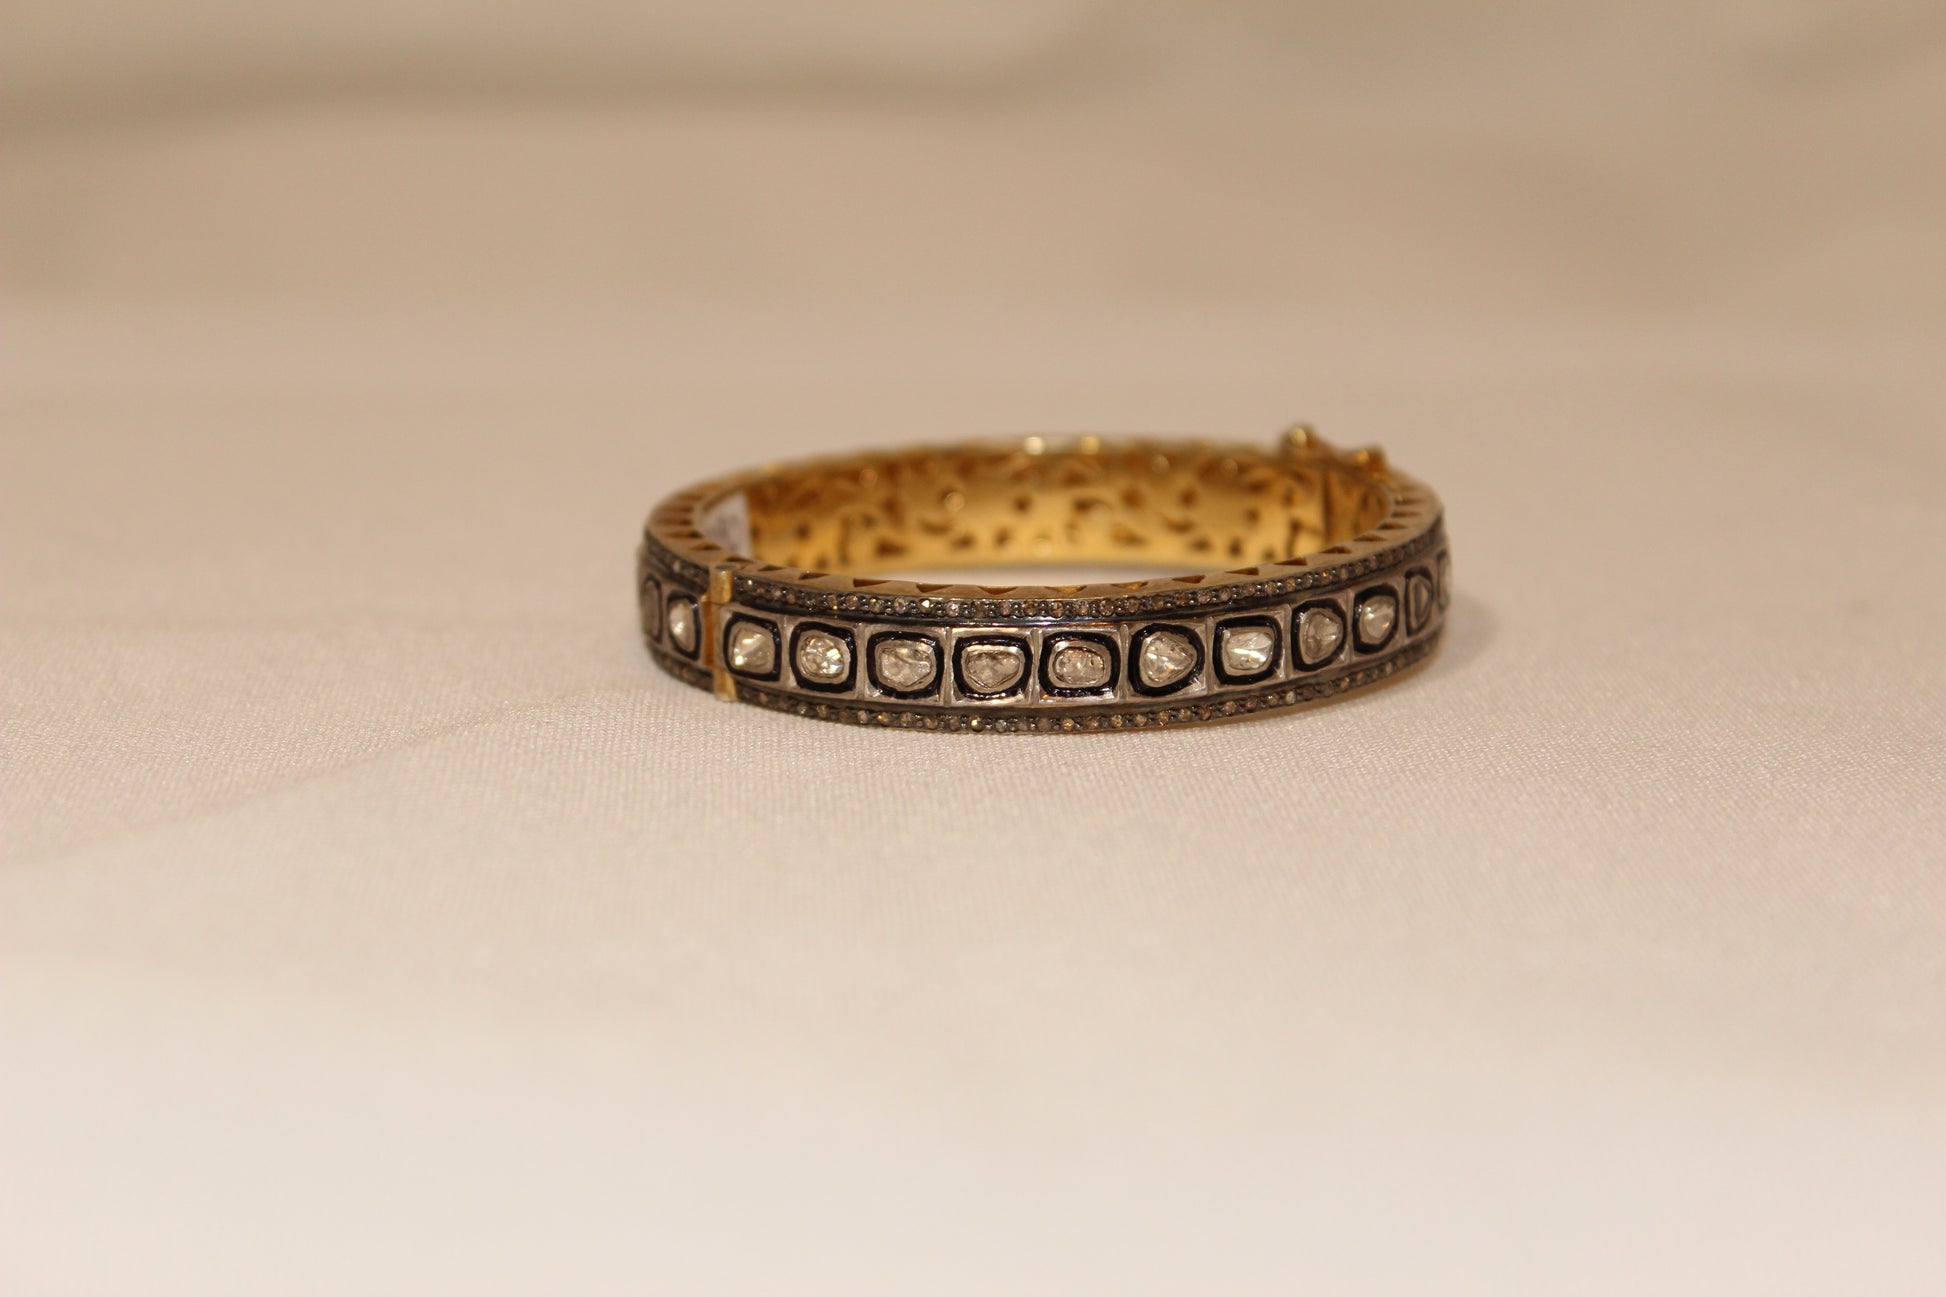 Rose cut diamond bangle with rhodium, oxidized sterling silver and yellow gold.  Sourced from India